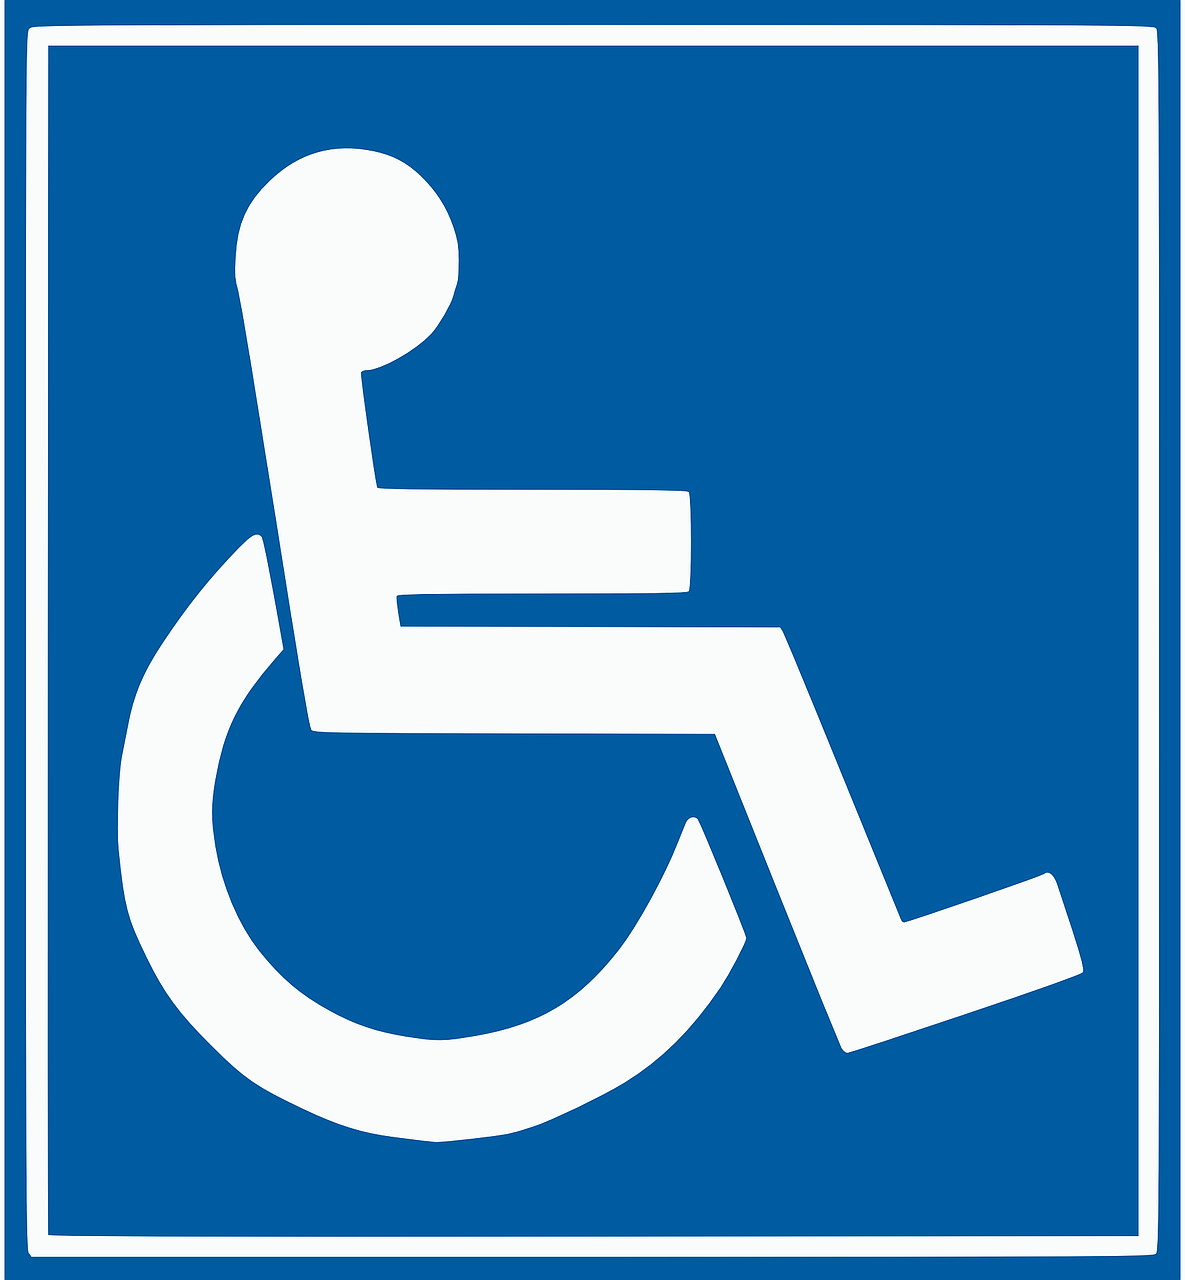 handicap-accessible-gafb163be6_1280.png